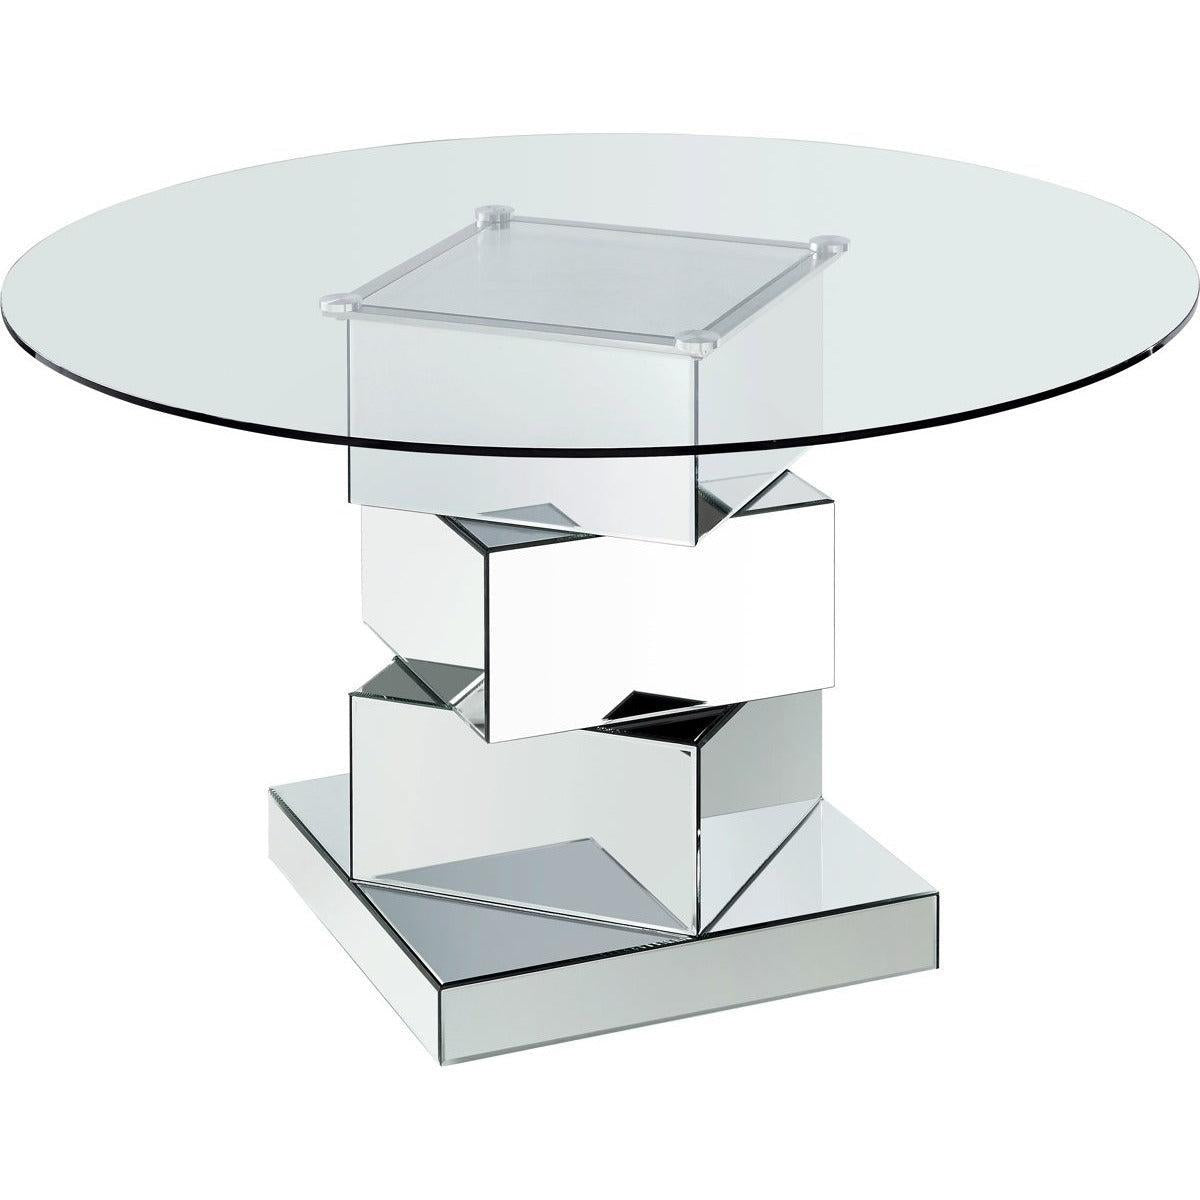 Meridian Furniture Haven Chrome Dining TableMeridian Furniture - Dining Table - Minimal And Modern - 1